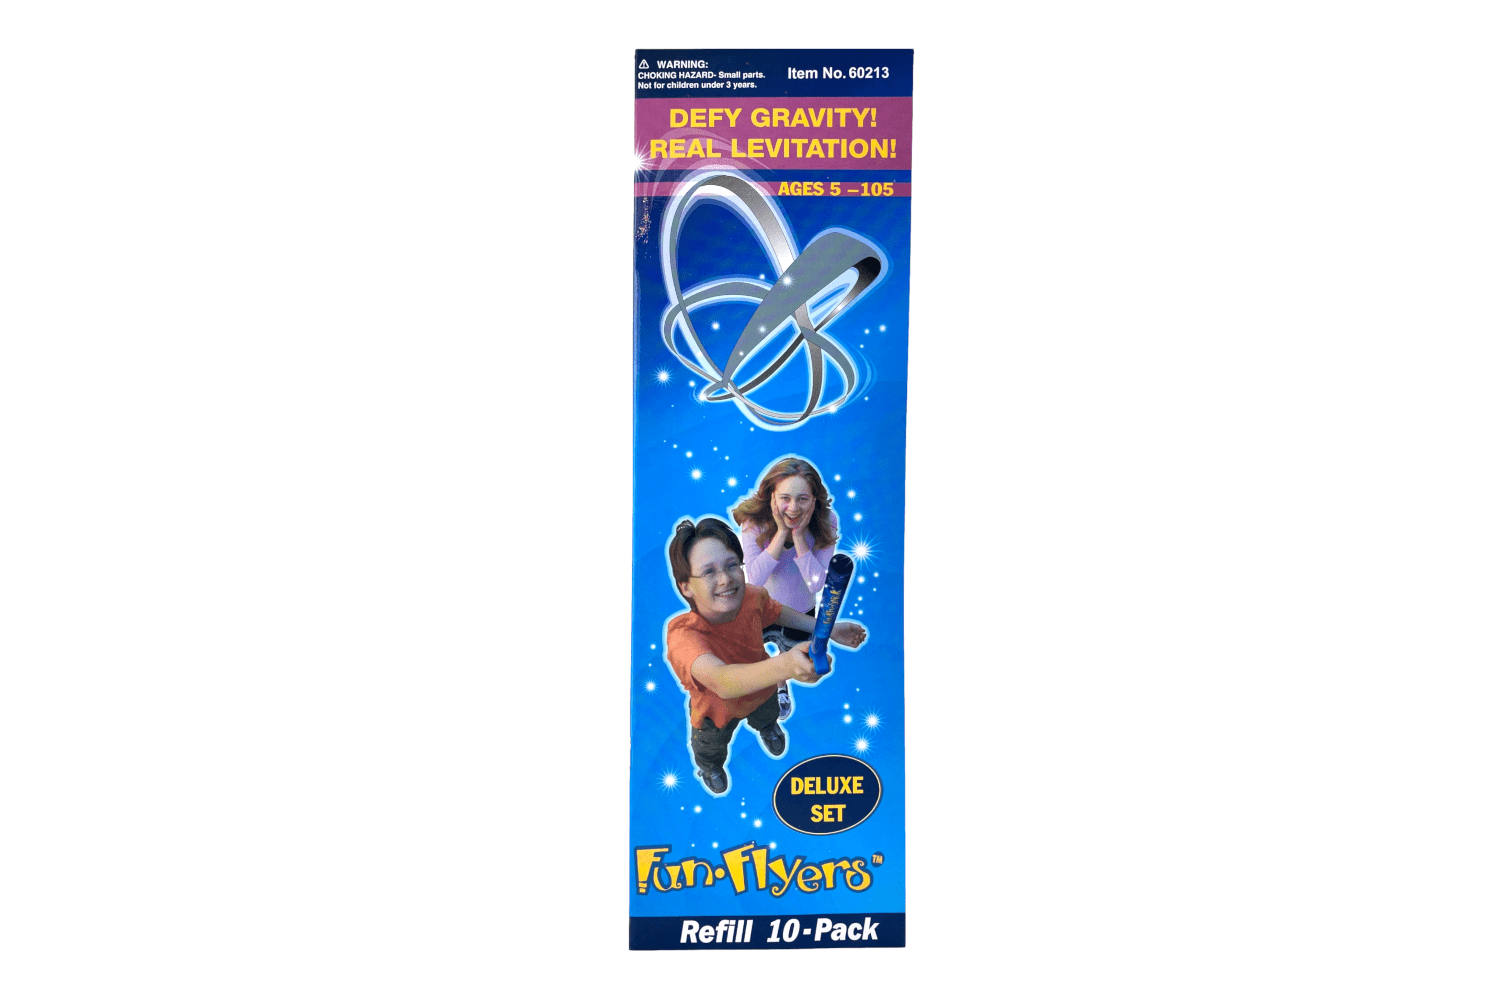 Arbor Scientific Fun Fly Stick Replacement Flyers - This Product has been discontinued